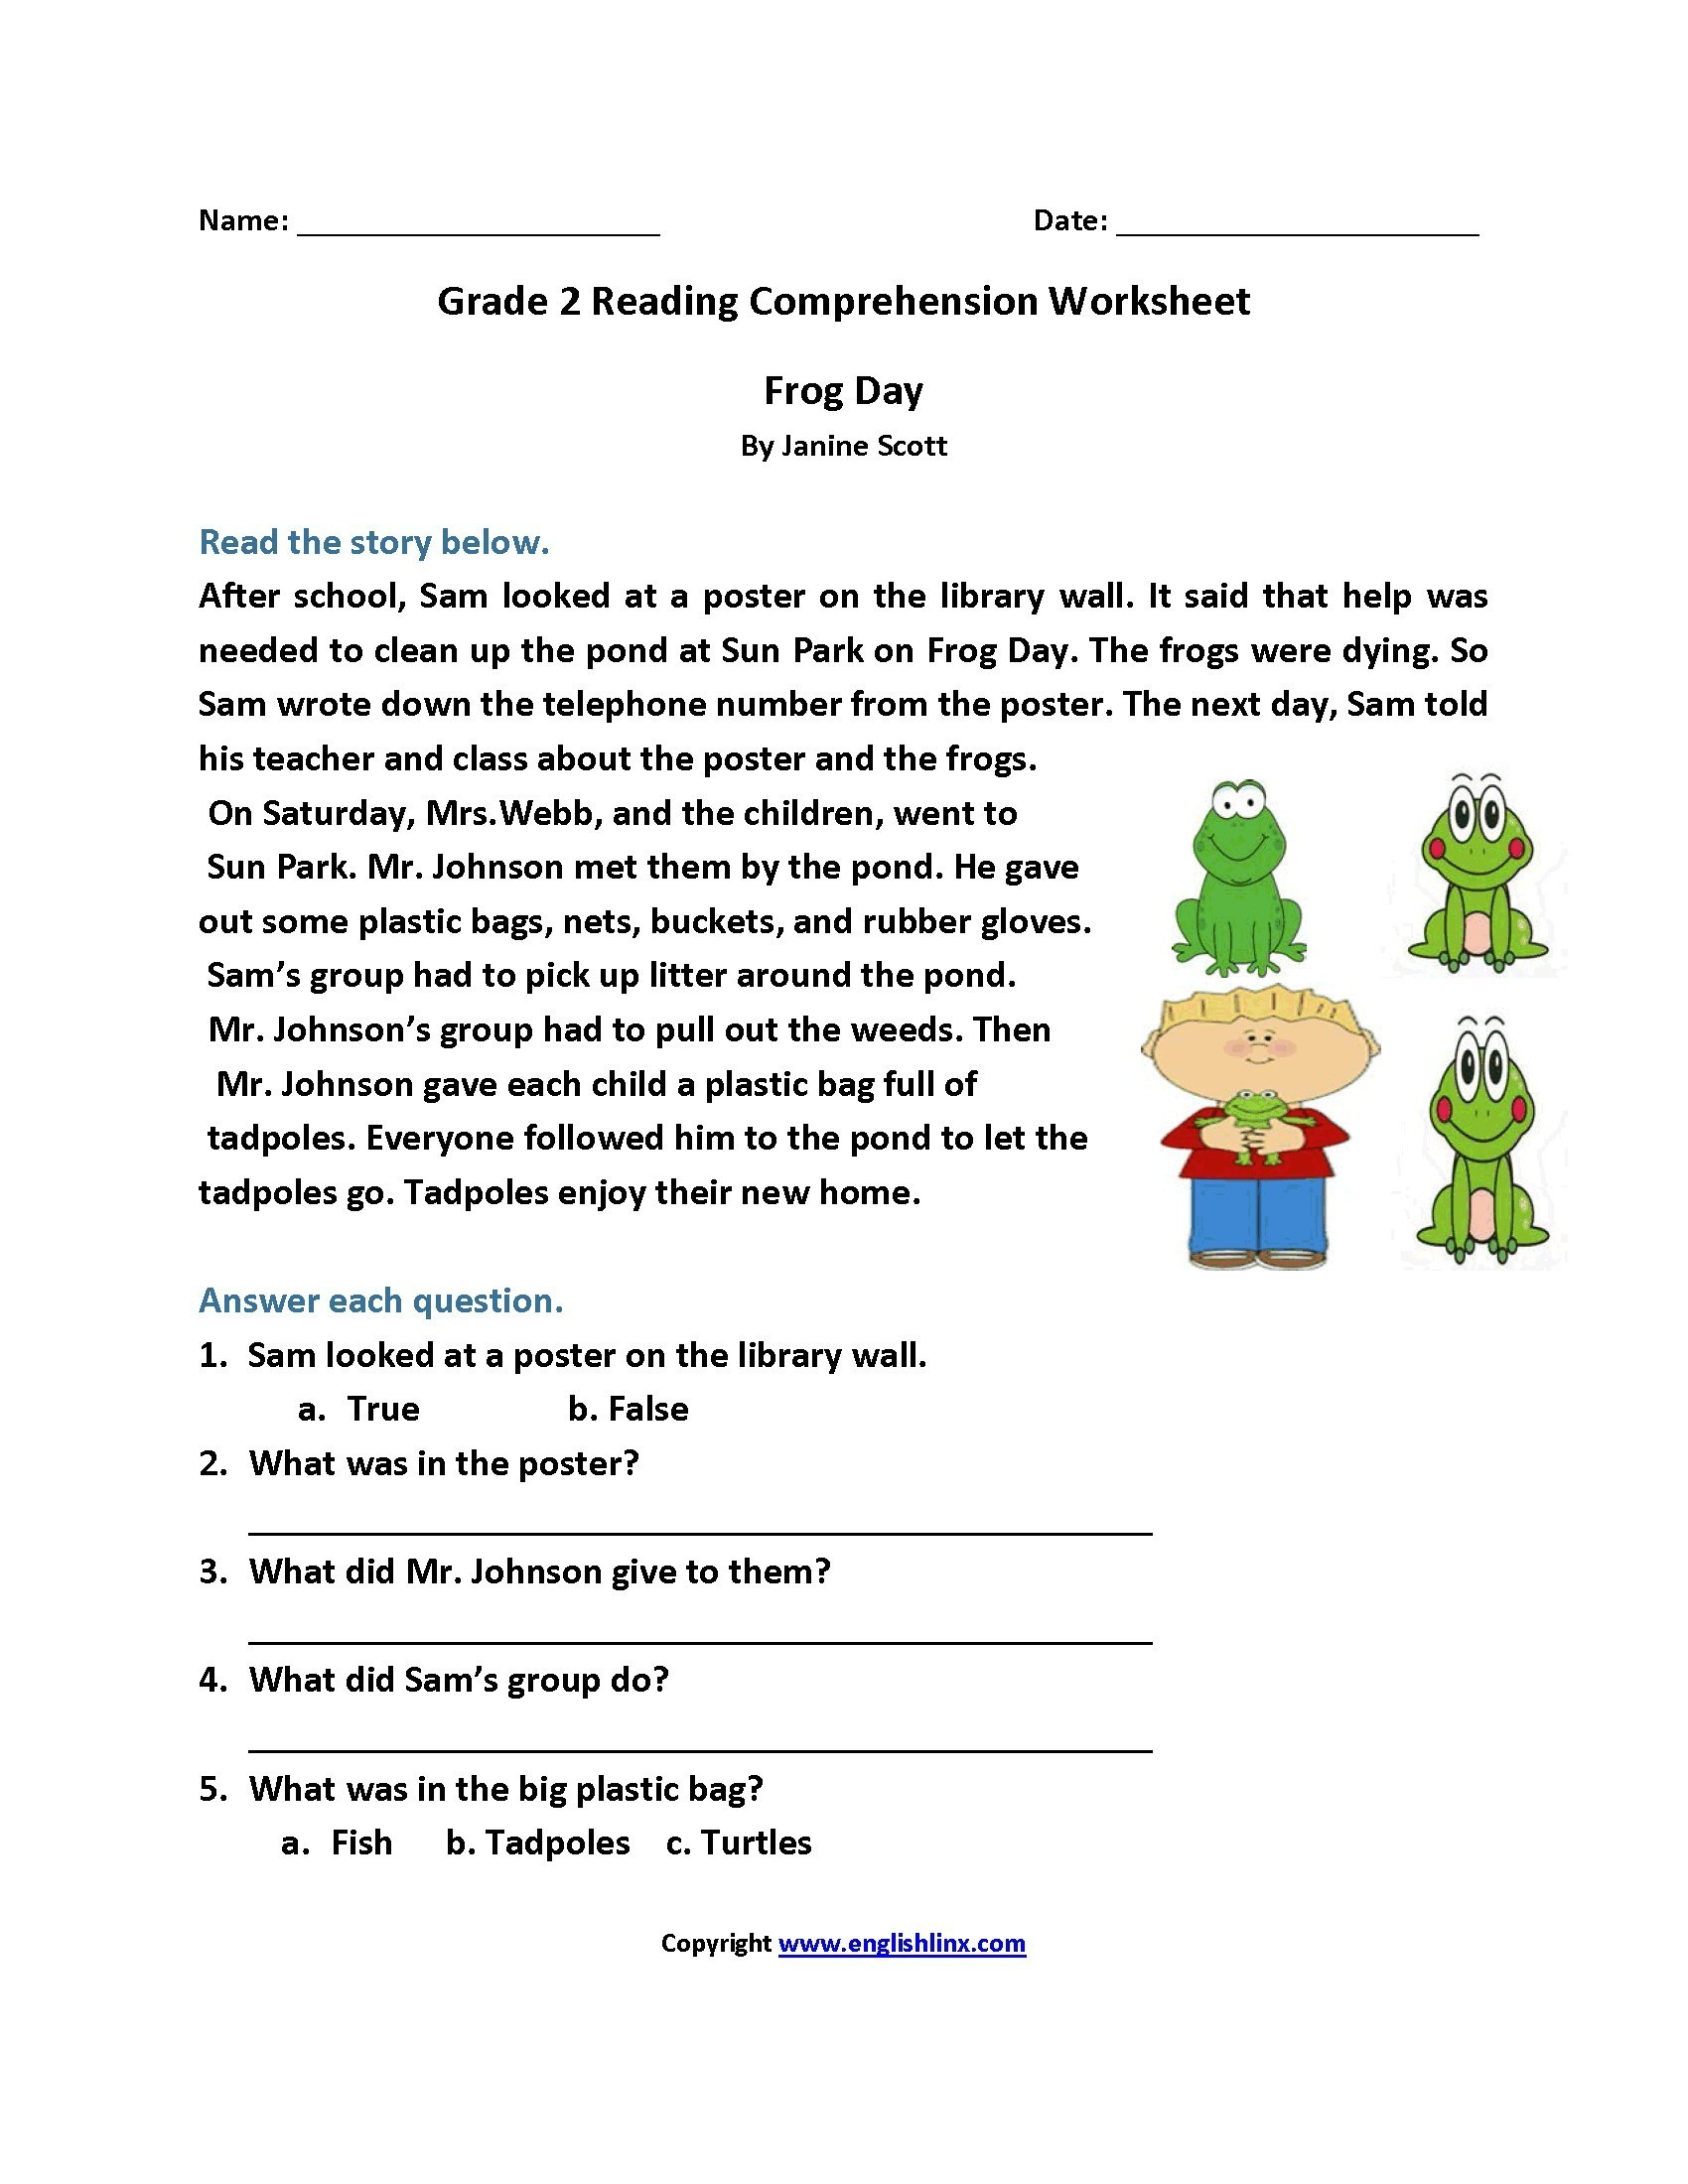 printable-reading-comprehension-worksheets-5th-grade-multiple-choice